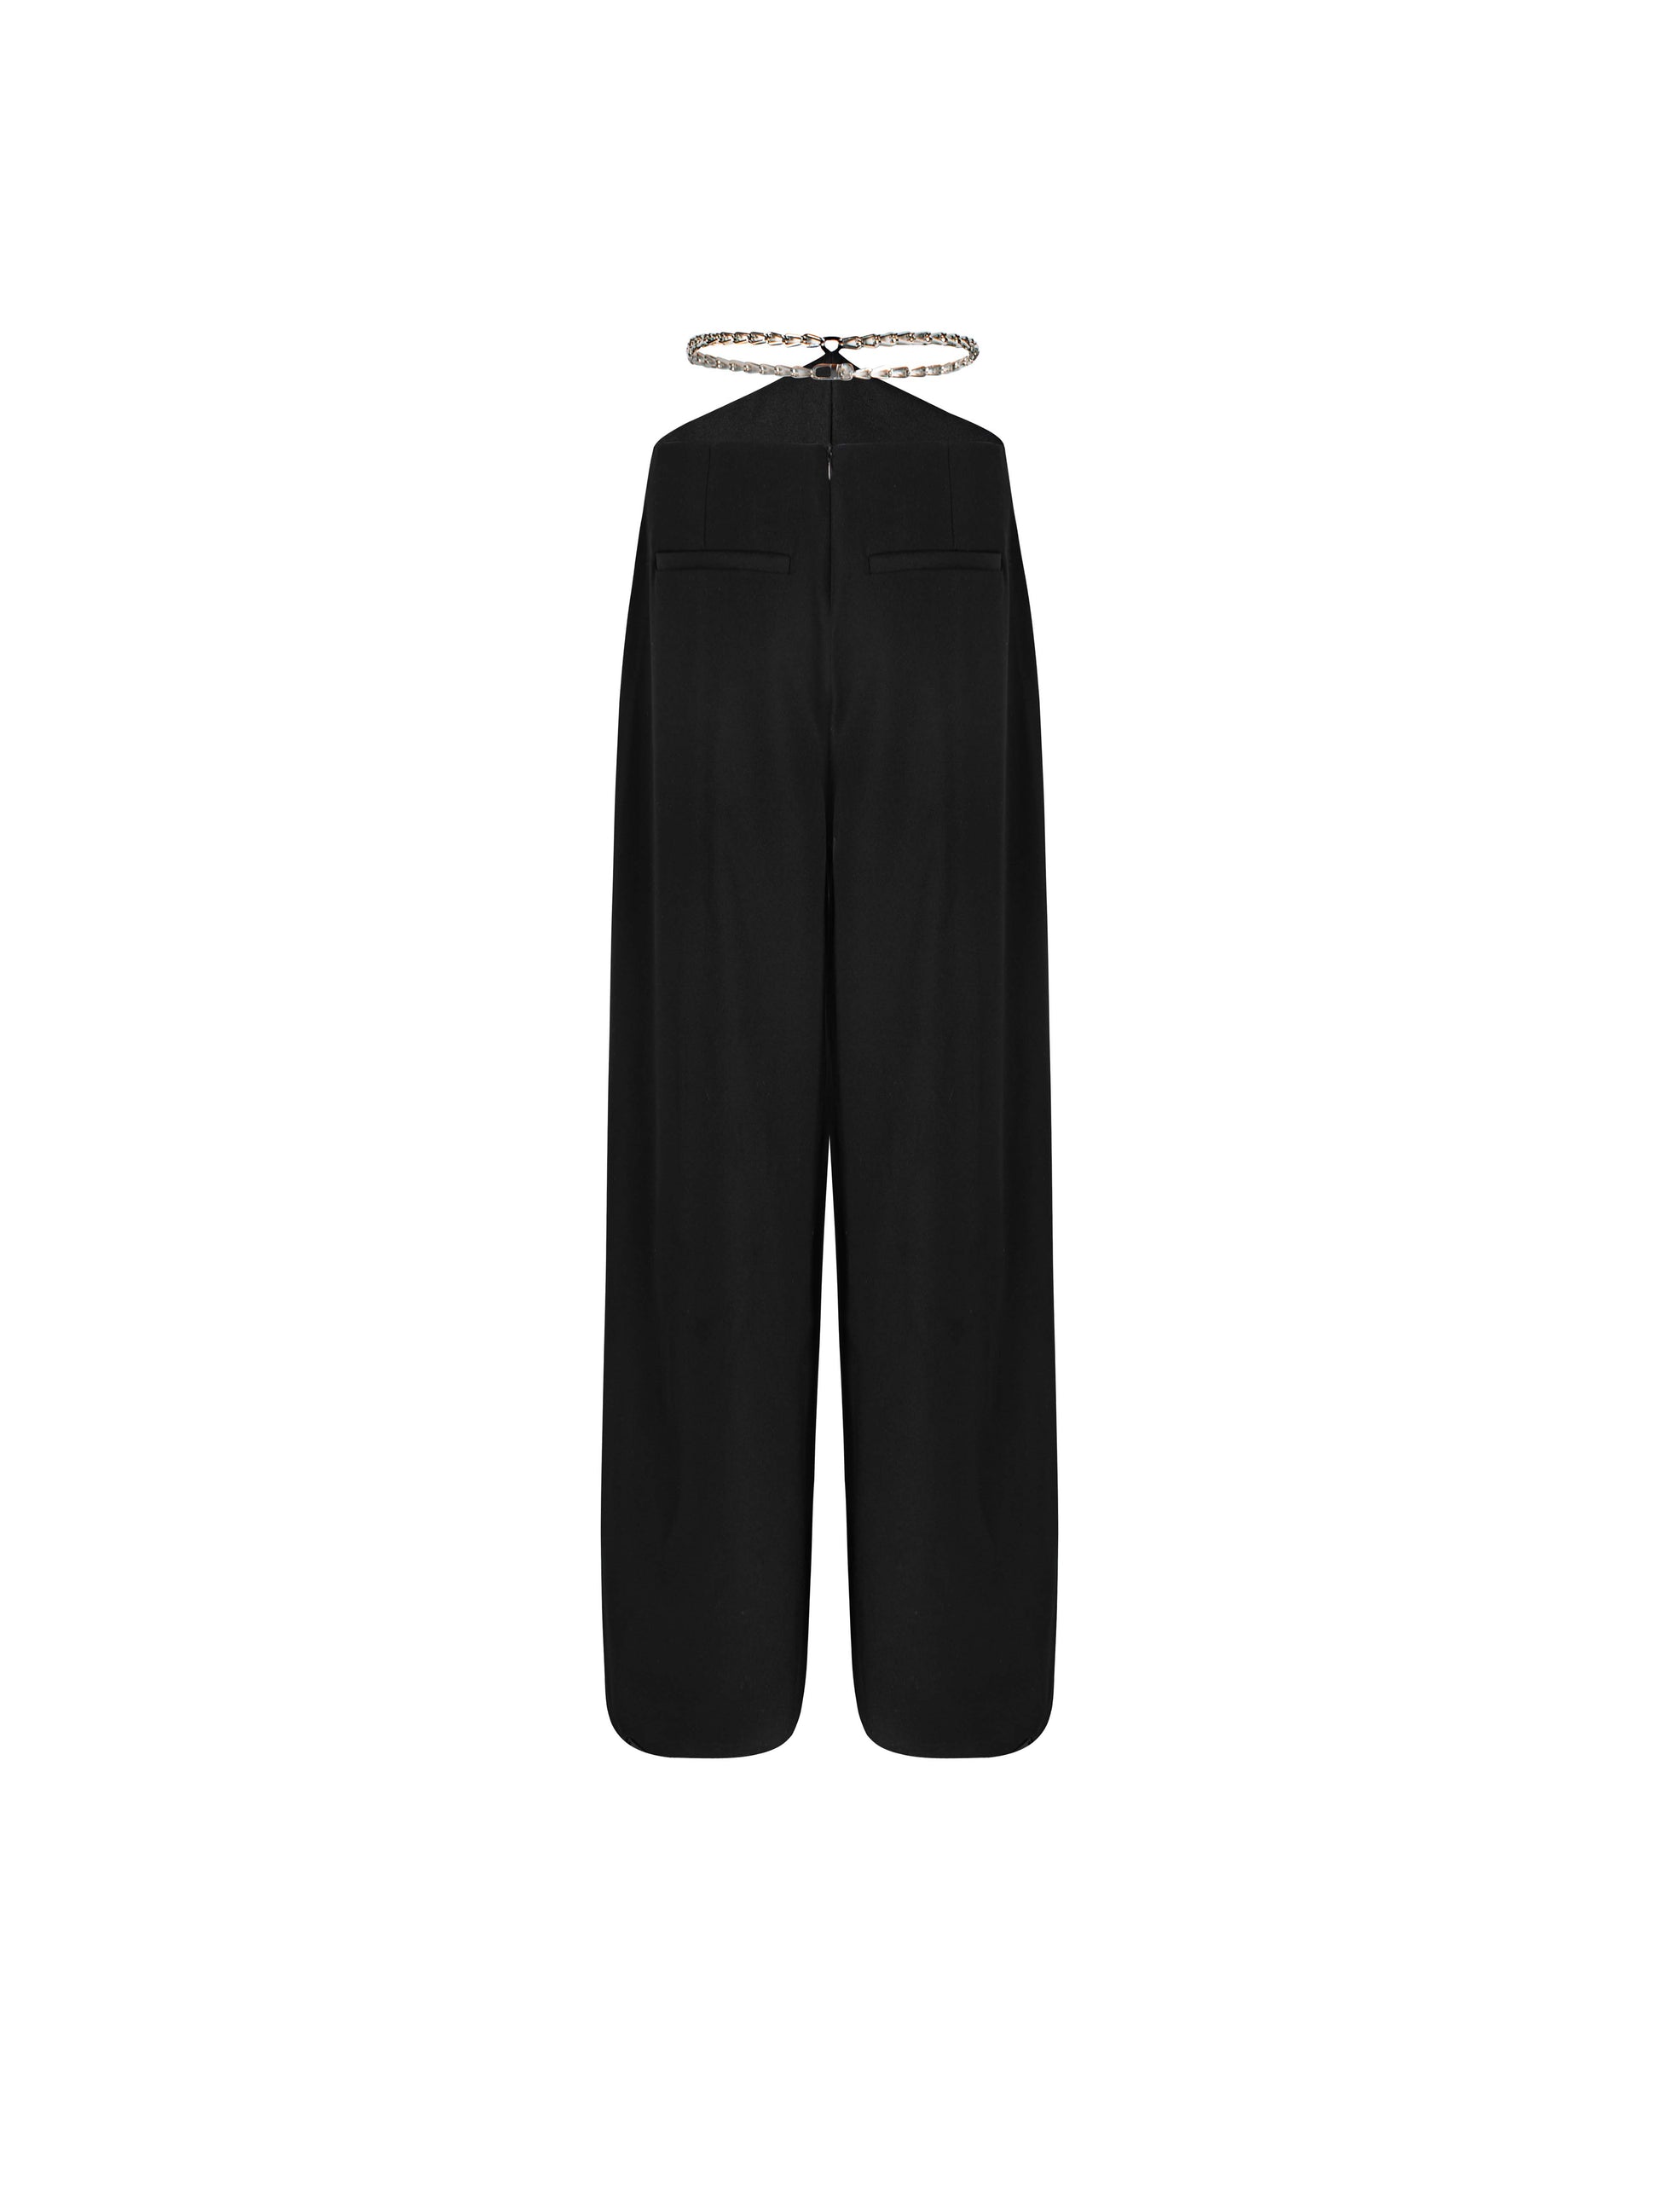 Black trousers with chain drape detail